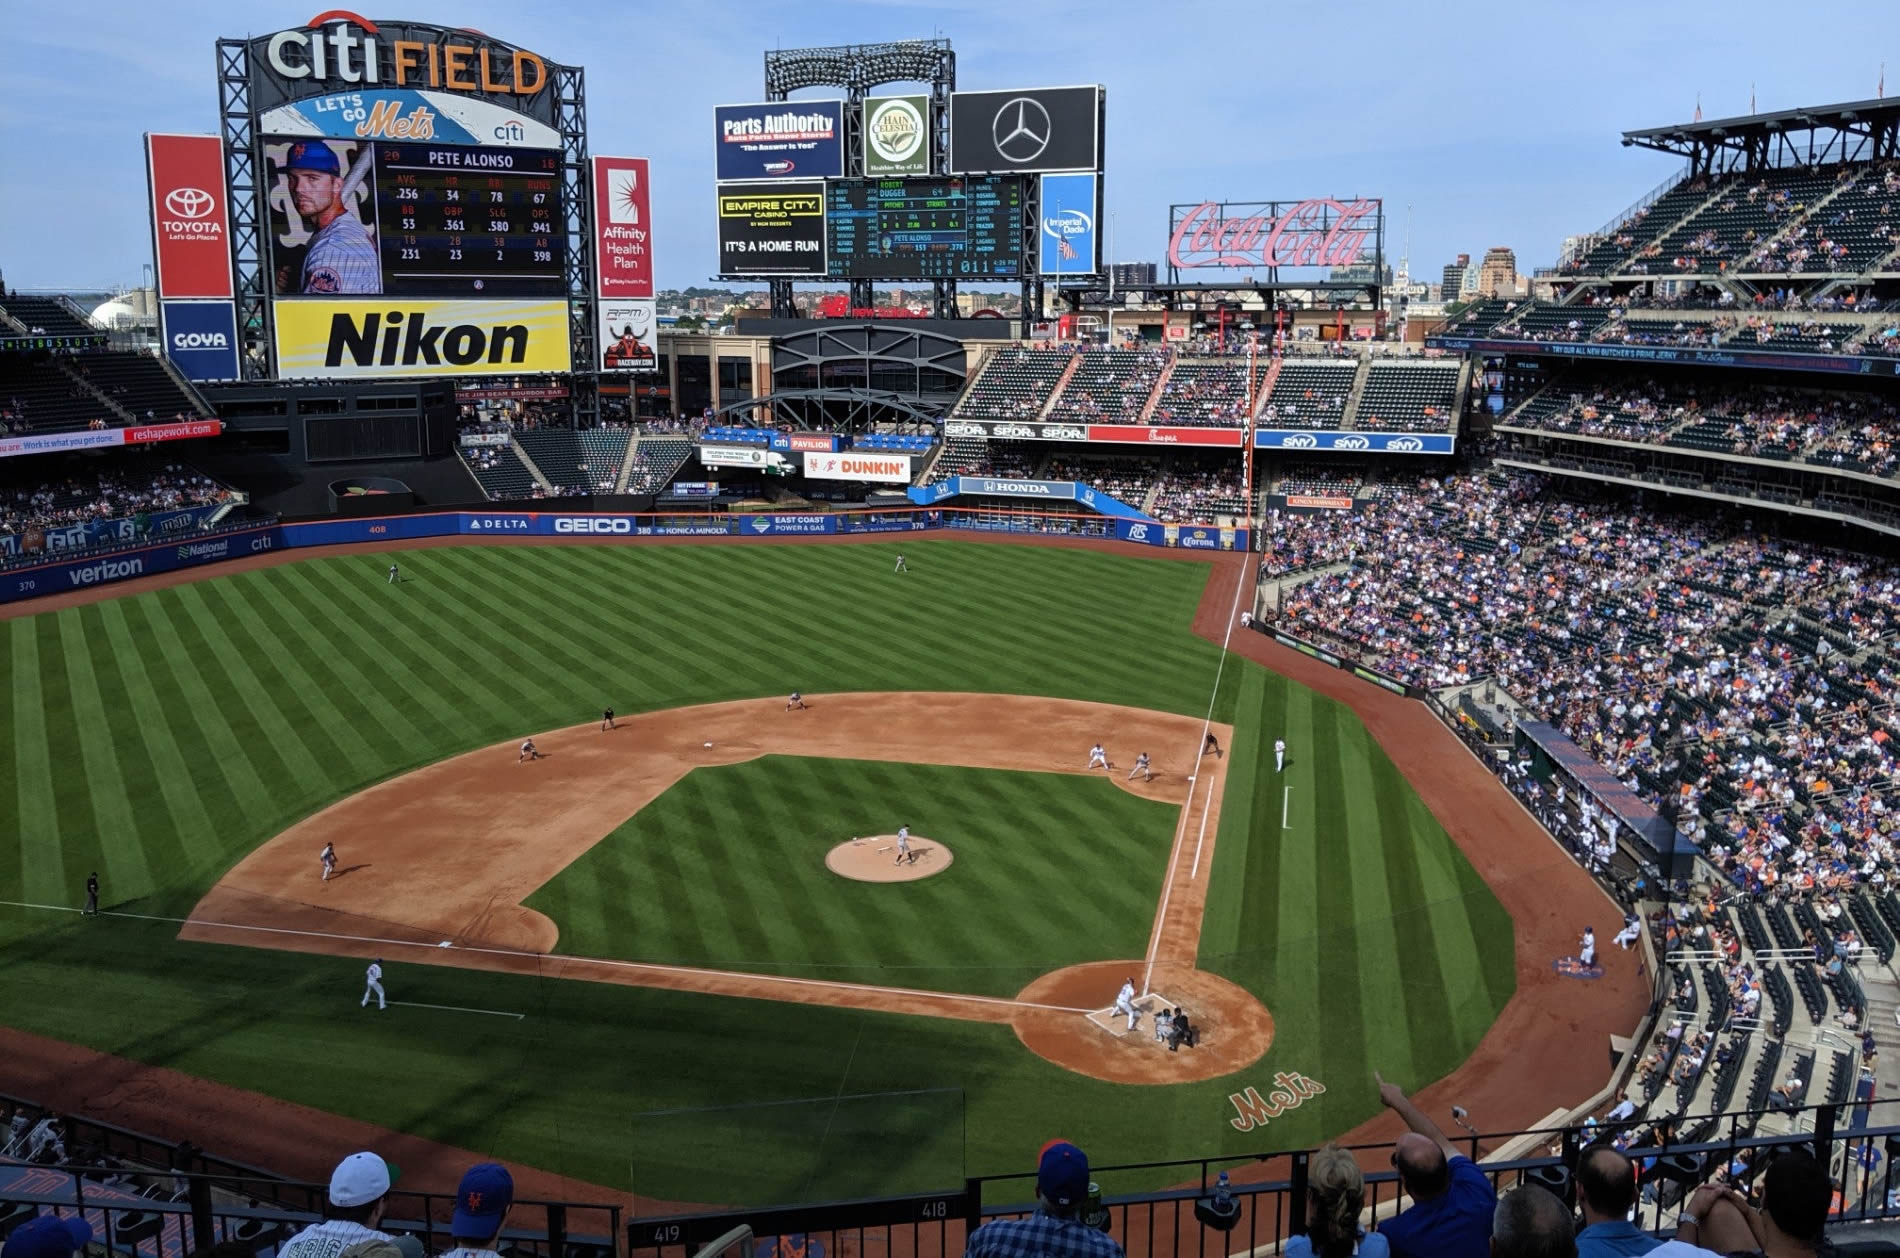 section 418, row 5 seat view  - citi field